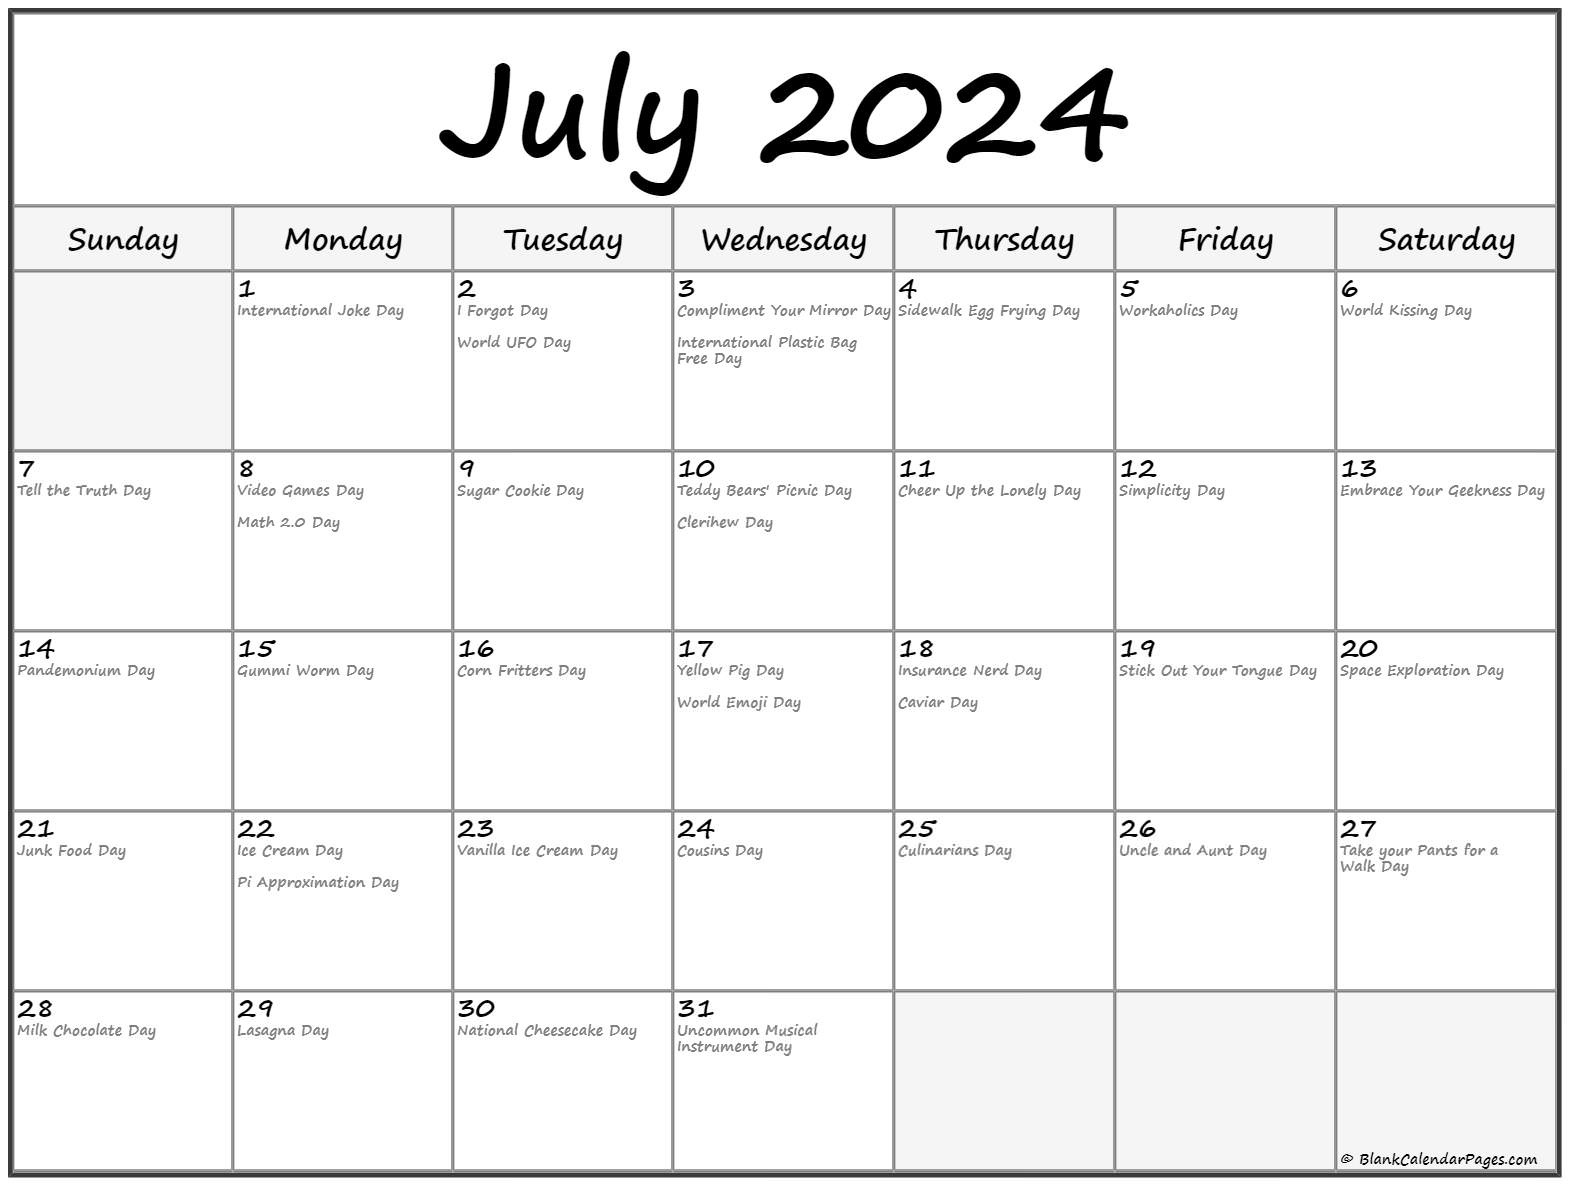 July 2024 With Holidays Calendar intended for National Calendar Day July 2024